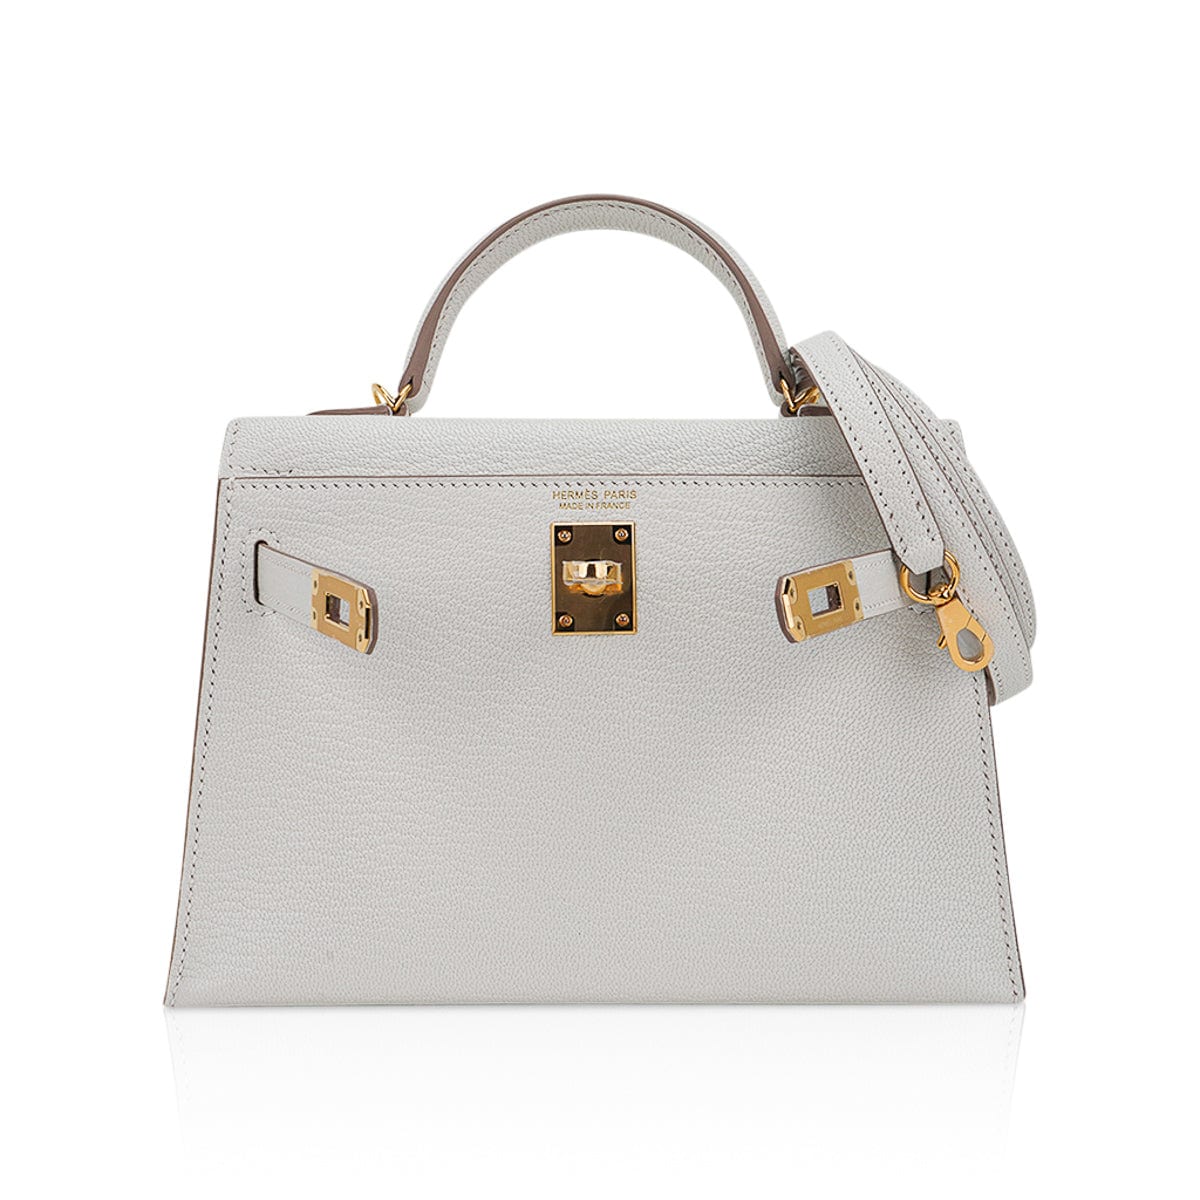 Shop Small Kelly Bag online